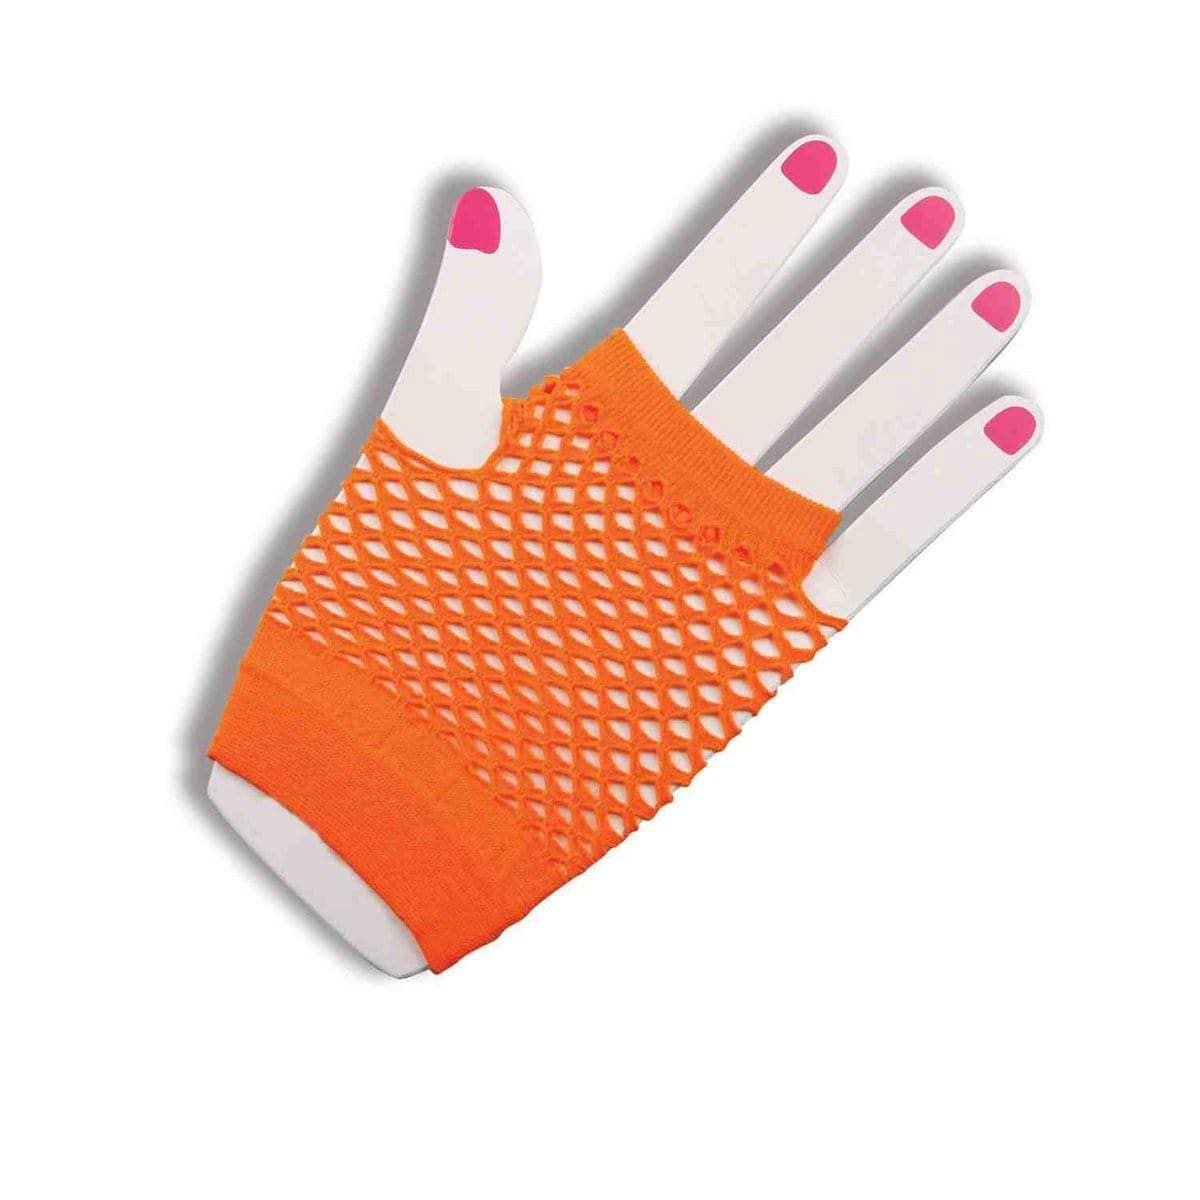 Buy Costume Accessories Orange short fingerless fisnet glove for adults sold at Party Expert